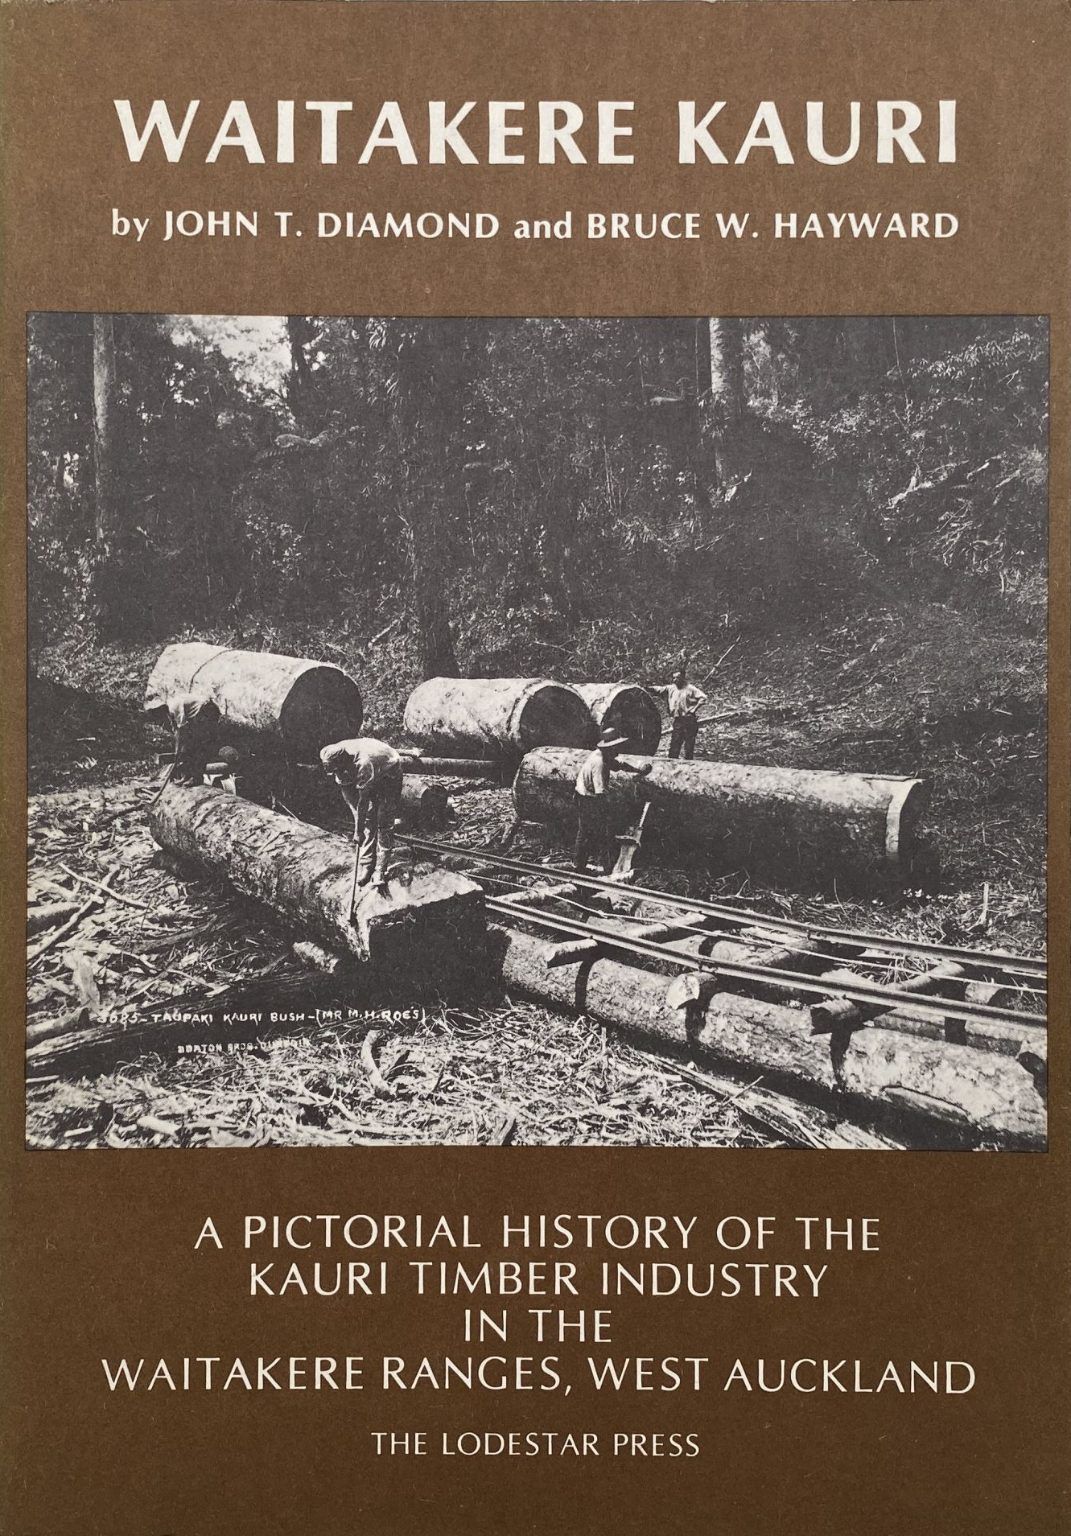 WAITAKERE KAURI: A Pictorial History of the Kauri Industry